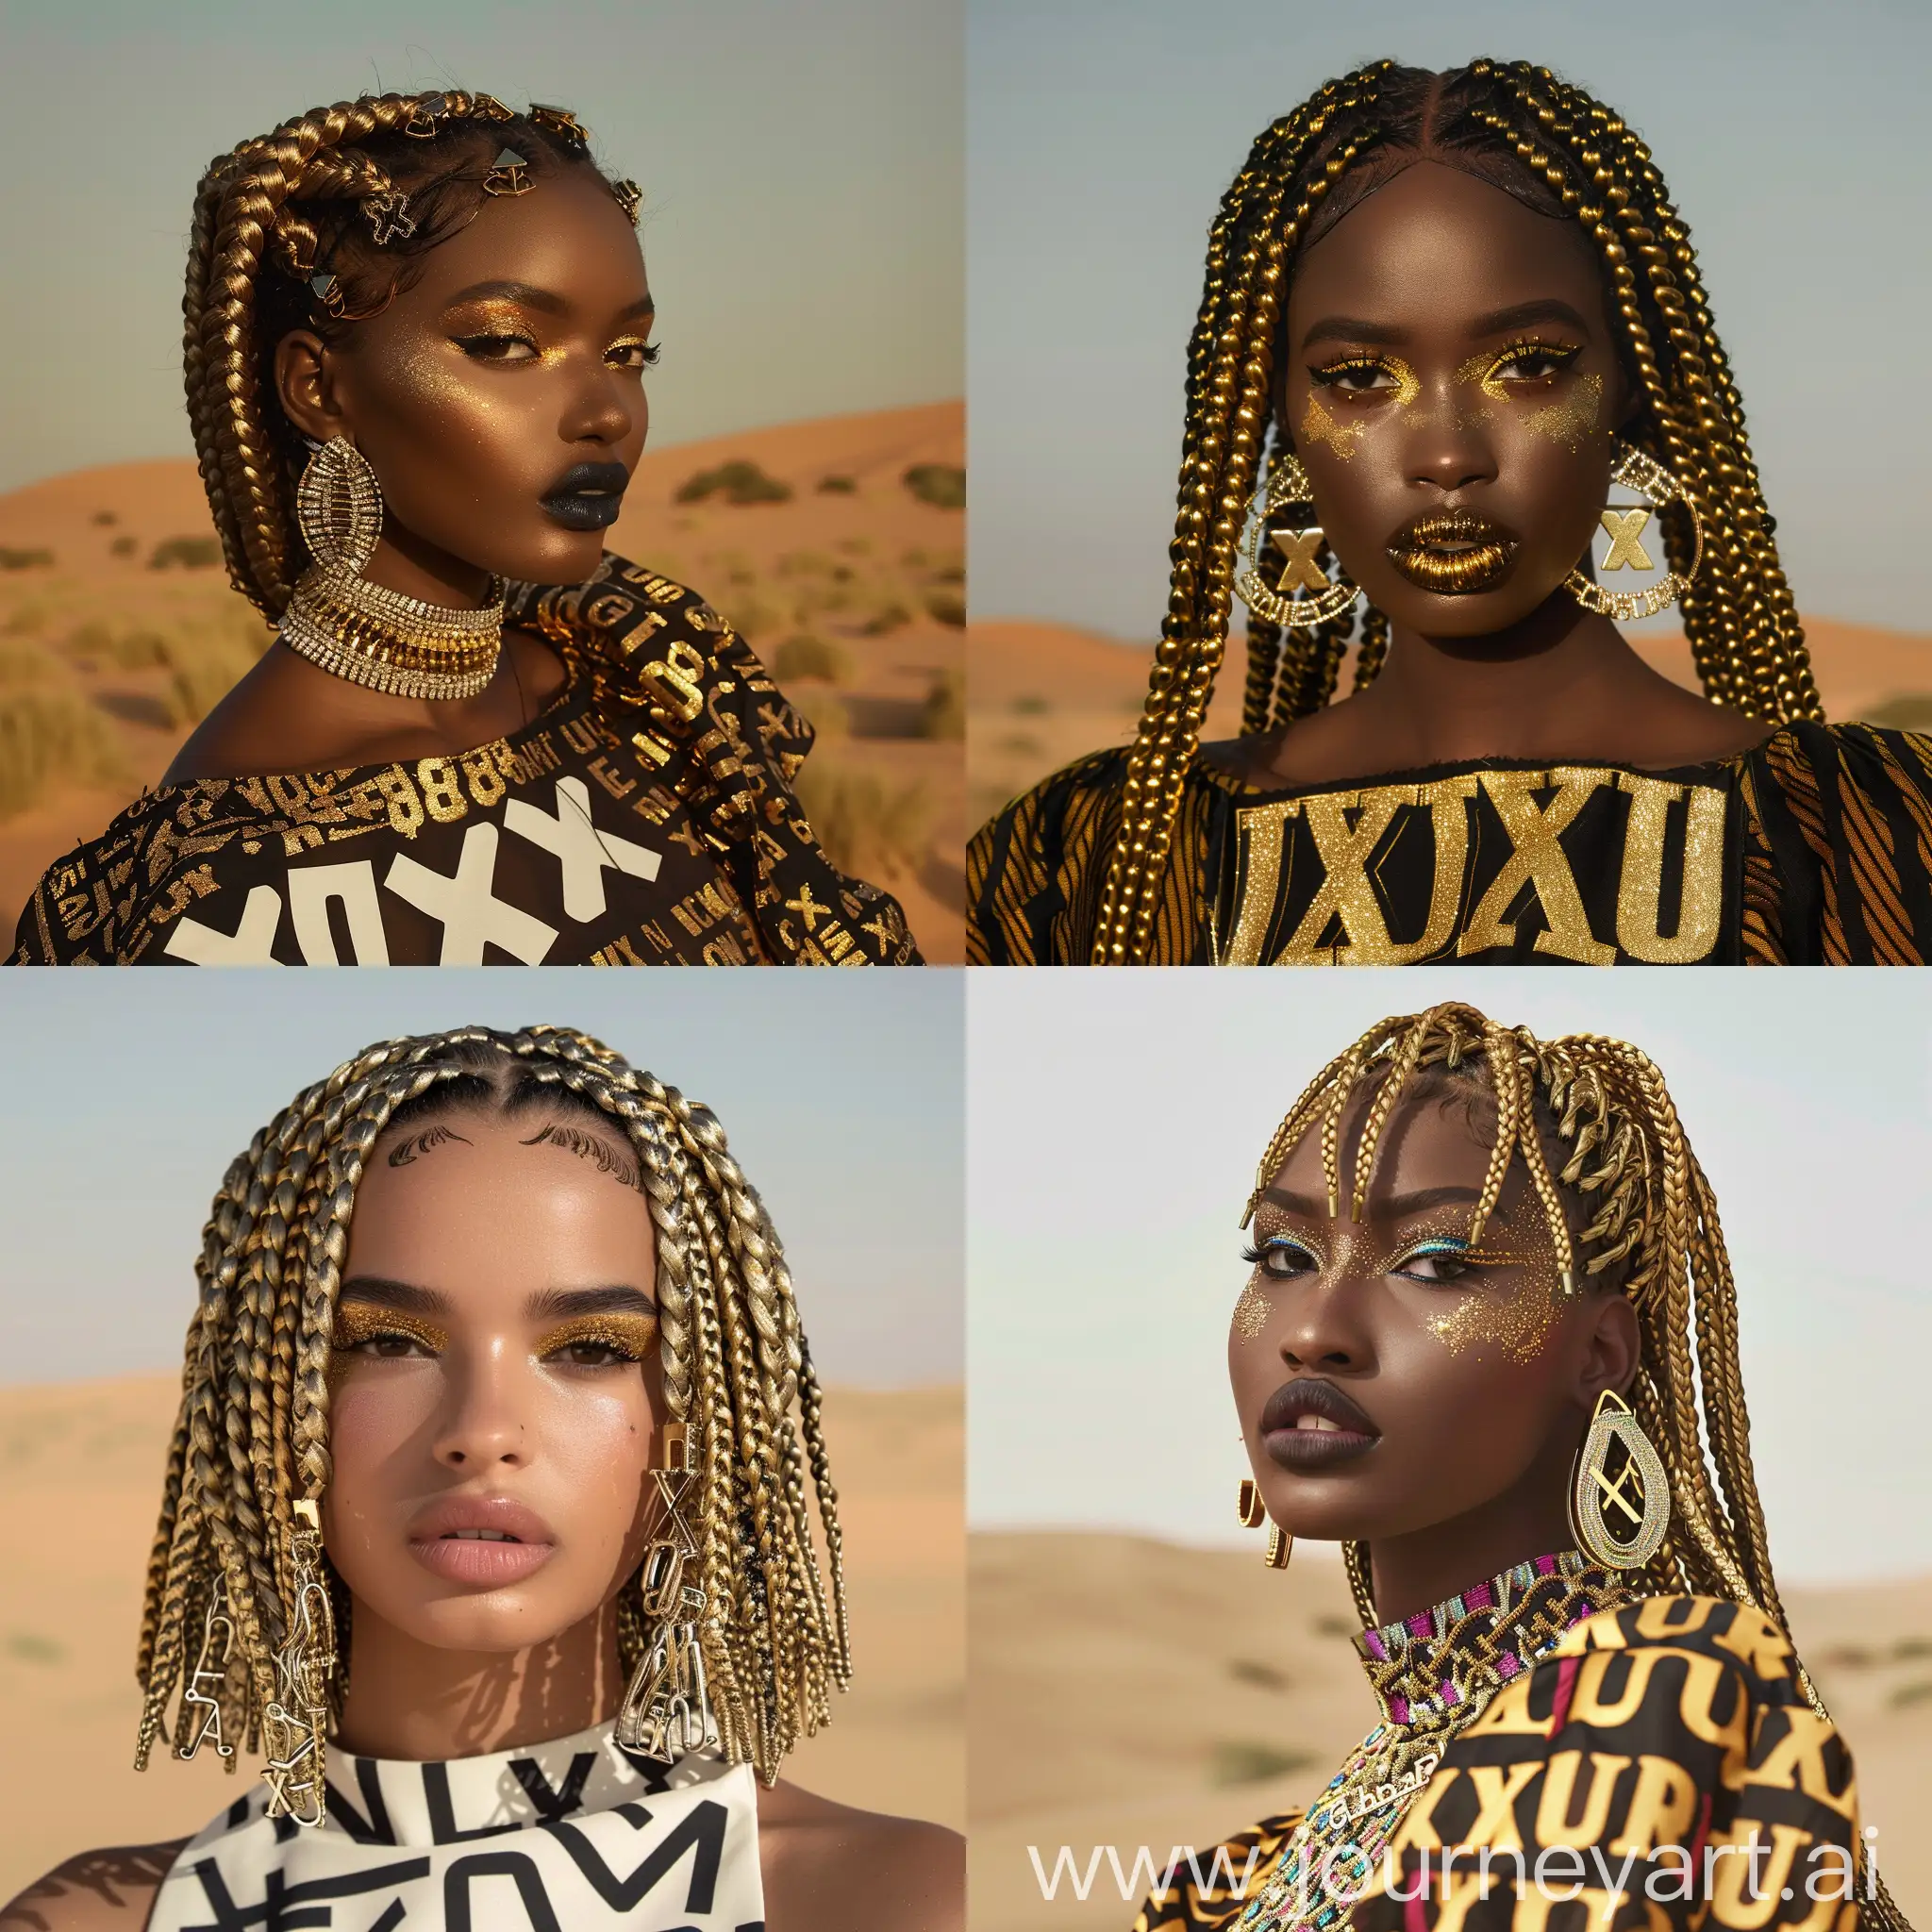 Gold-Braided-Hair-Fashion-Photoshoot-in-the-African-Desert